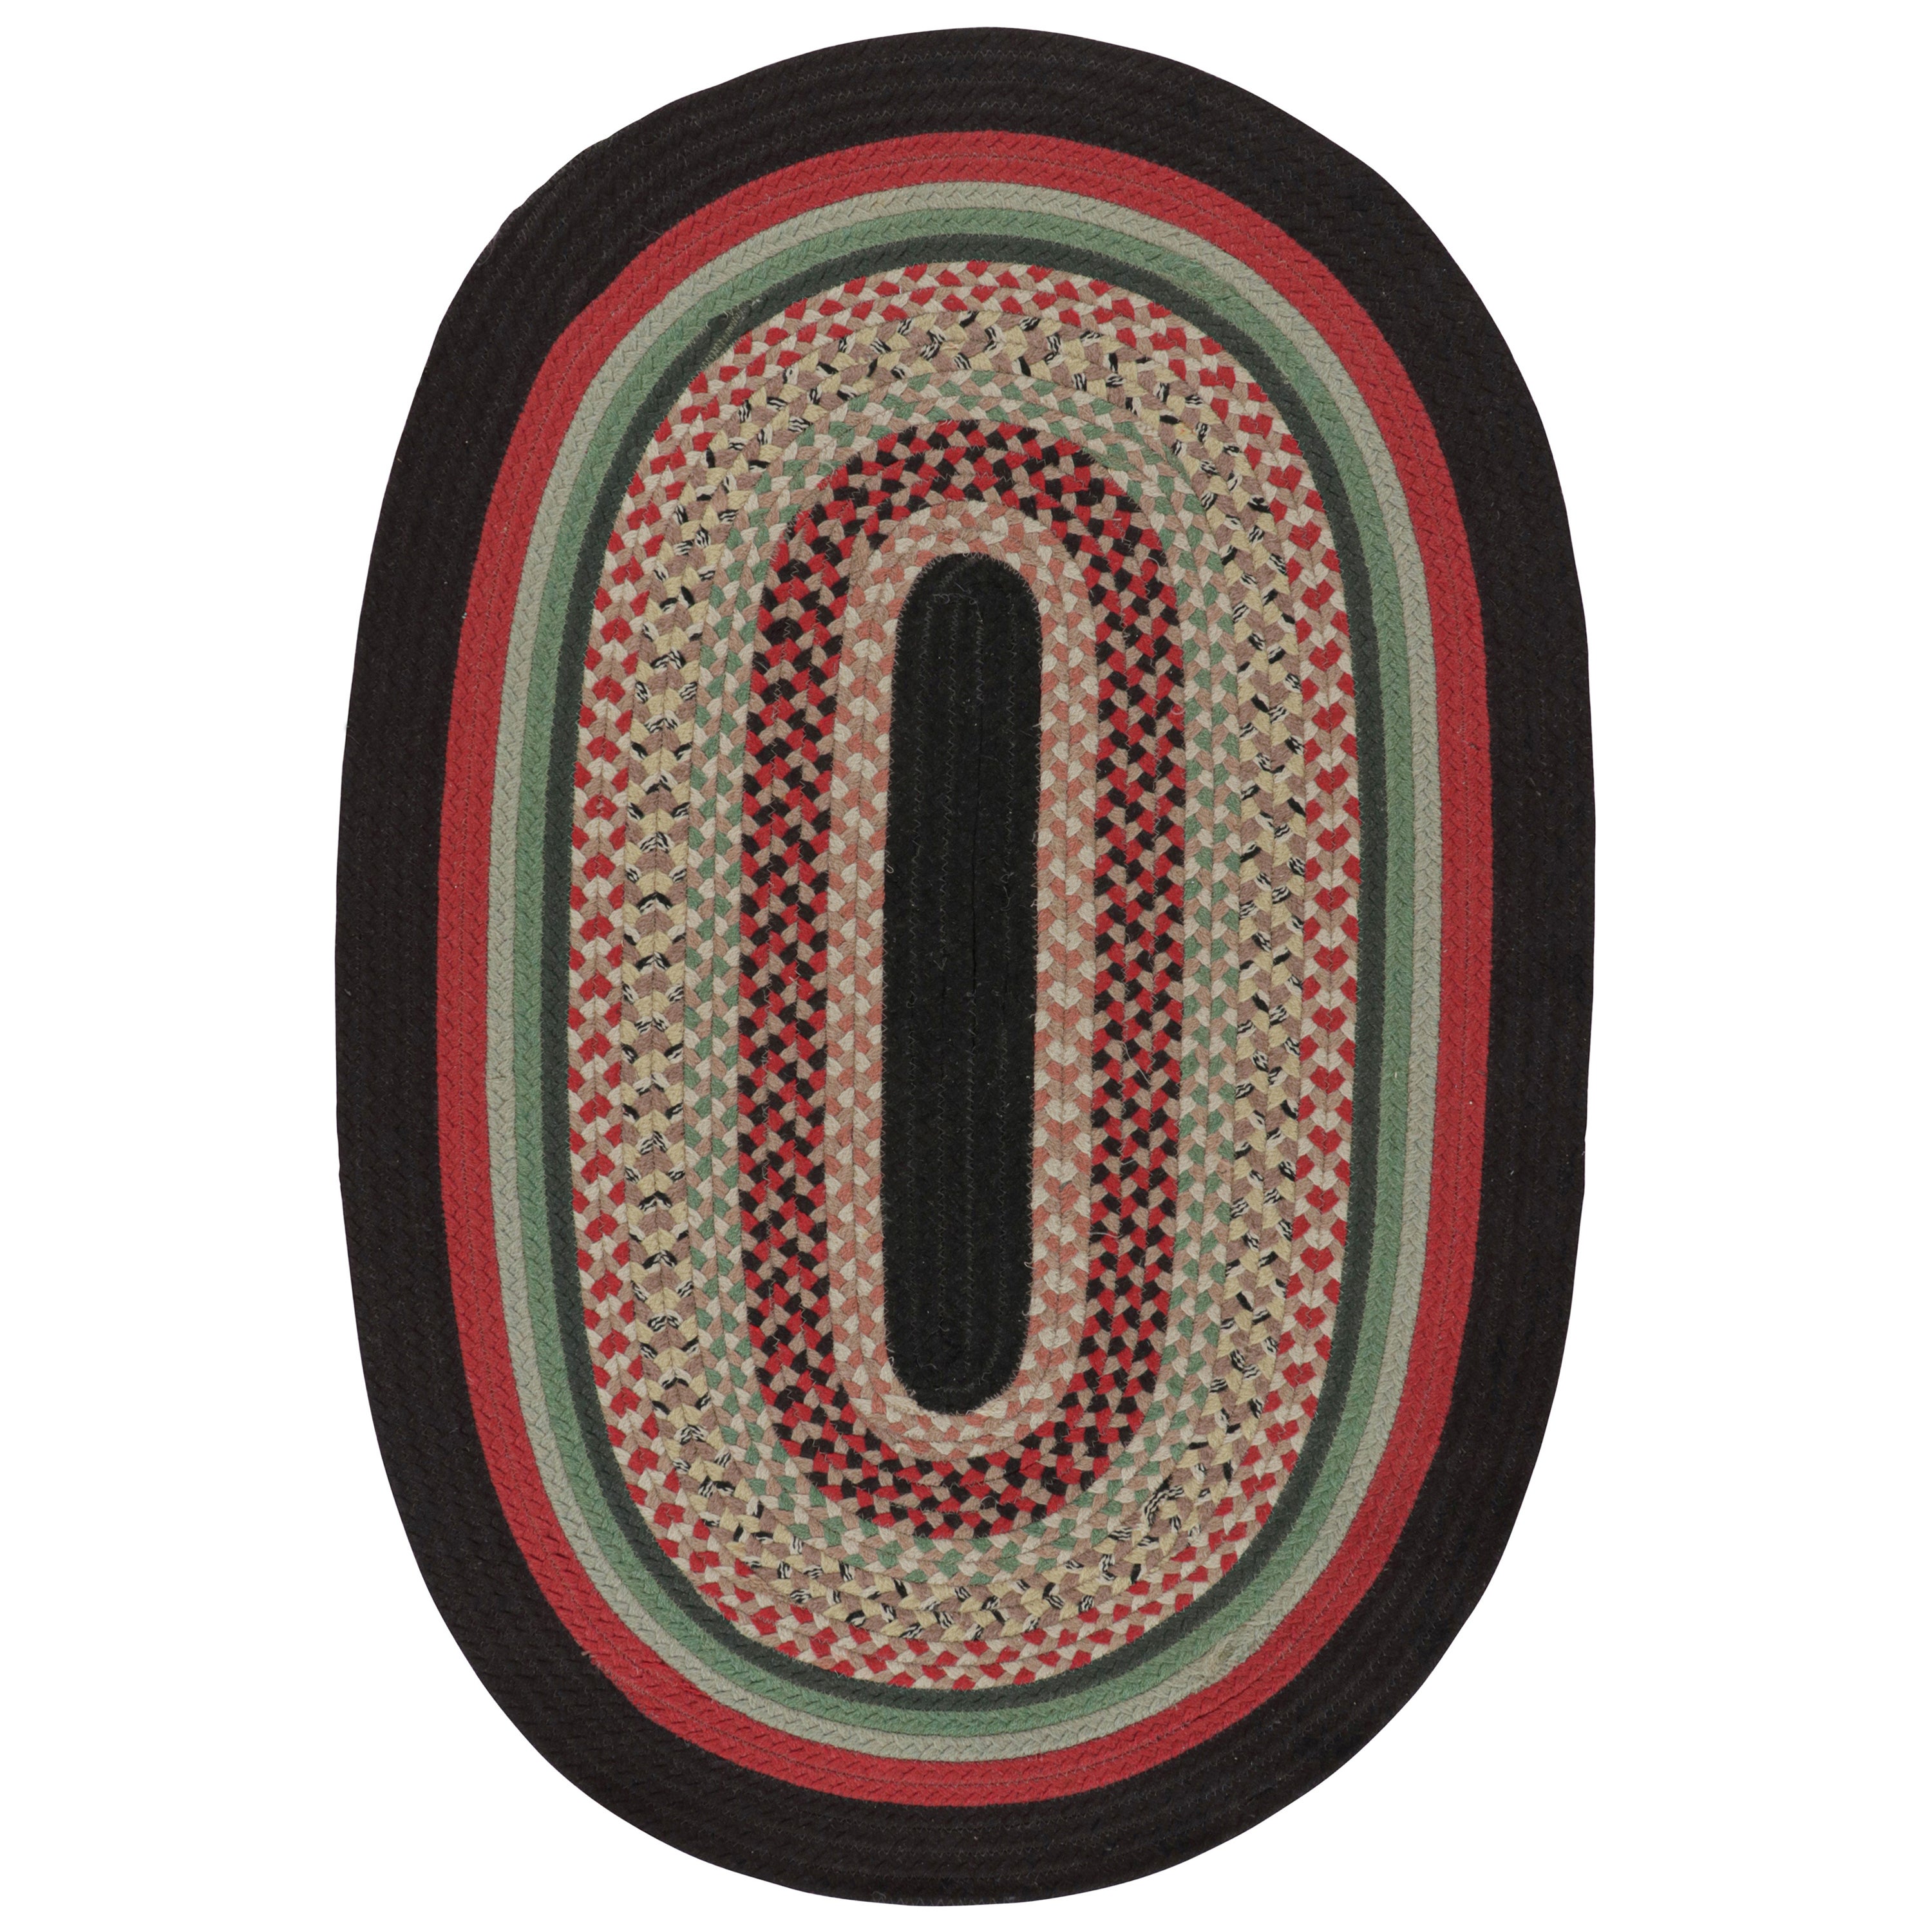 Antique Hooked Oval Rug with Polychromatic Braided Stripes, from Rug & Kilim For Sale